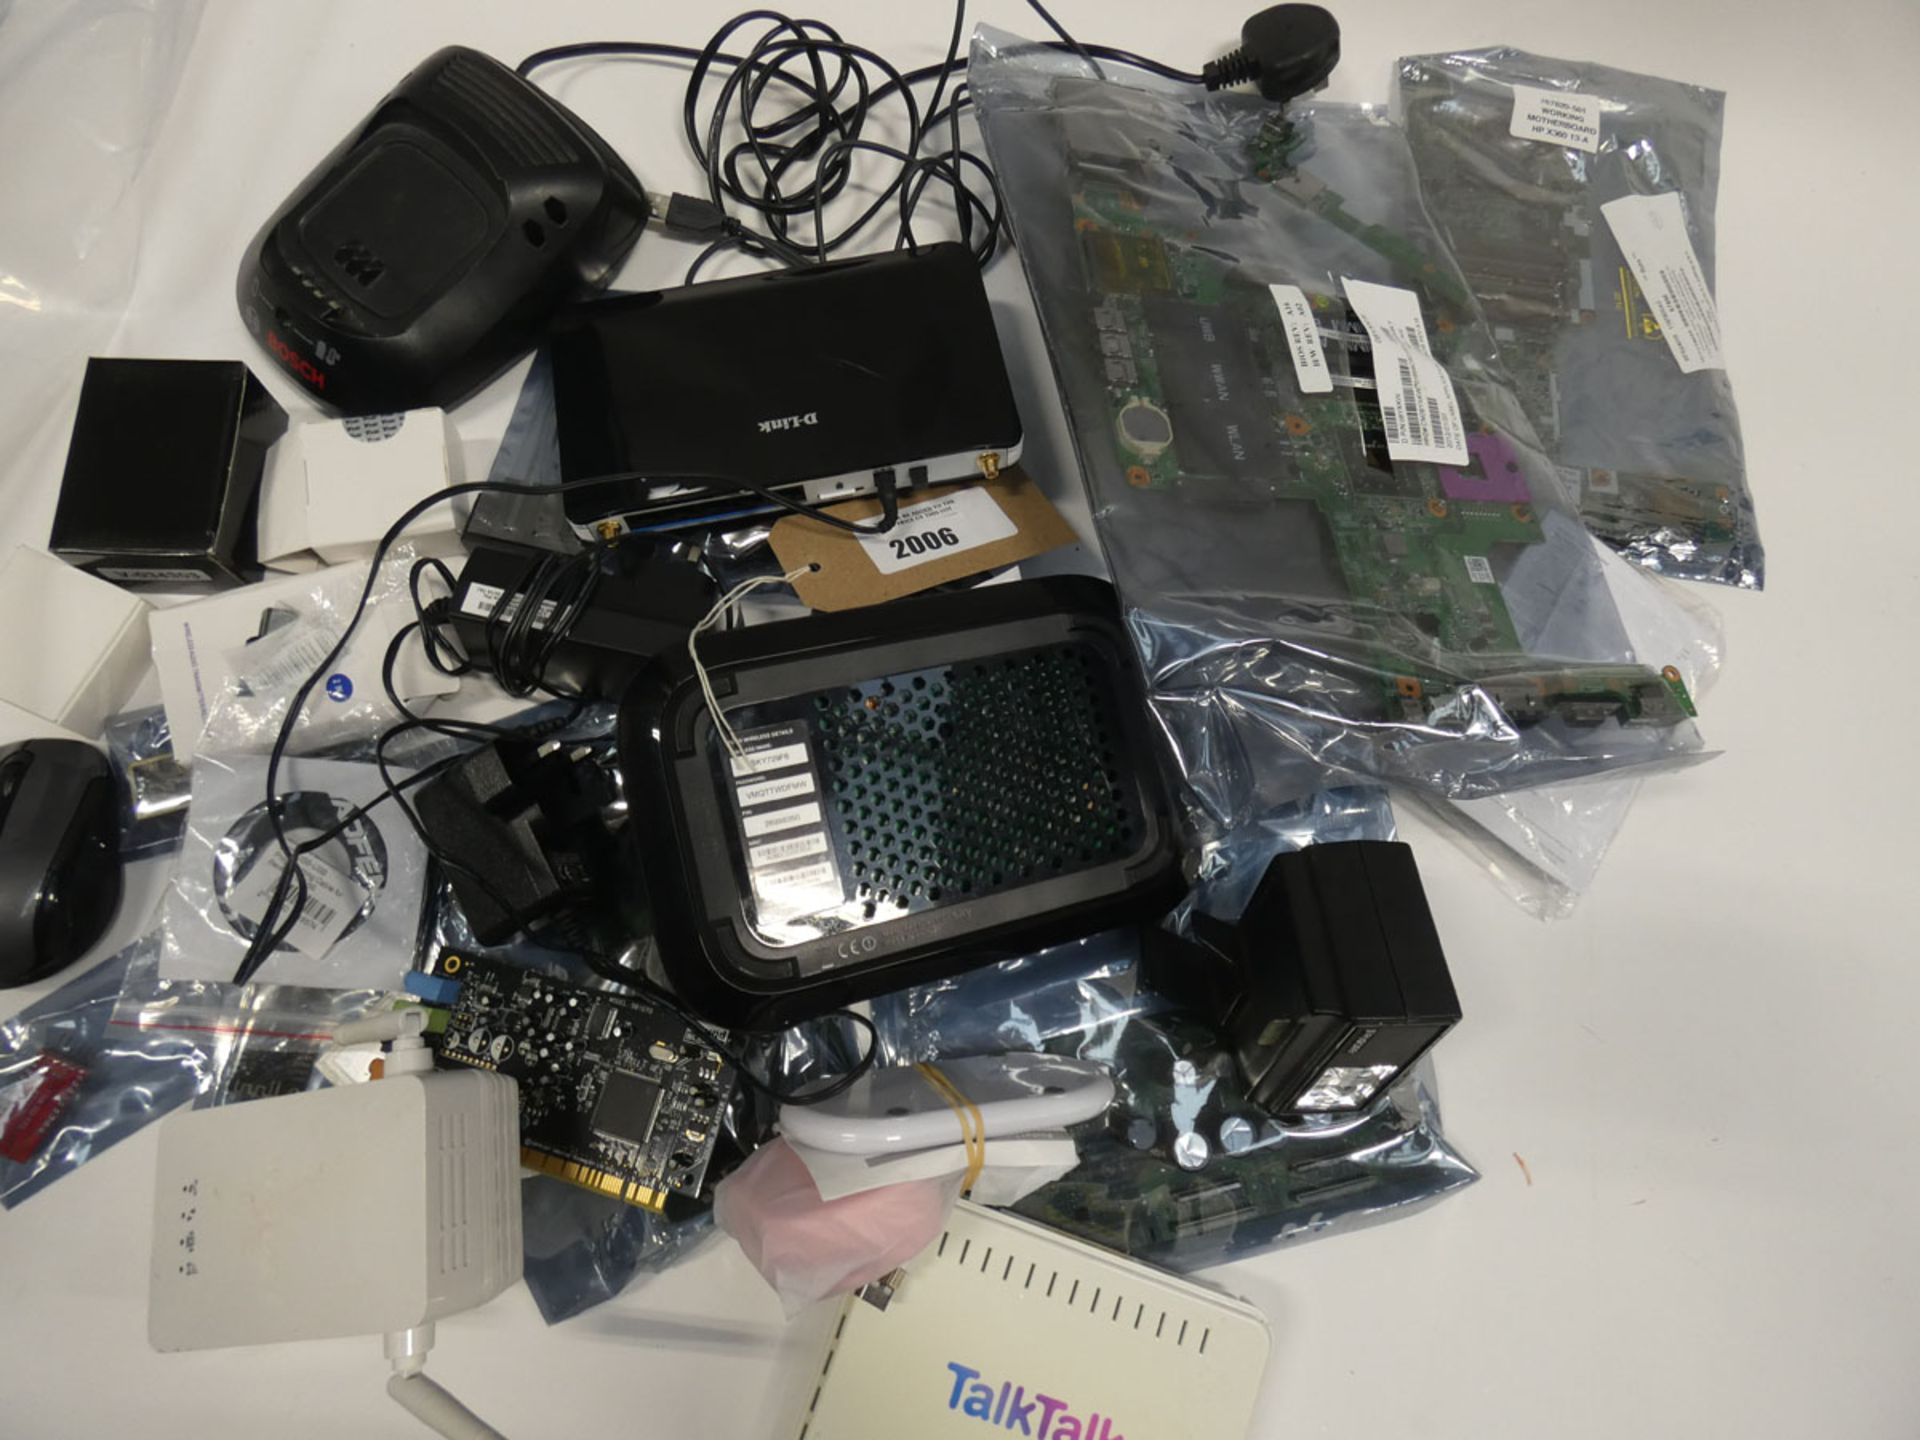 Bag containing various electrical related devices/accessories; routers, headset, spare boards, mouse